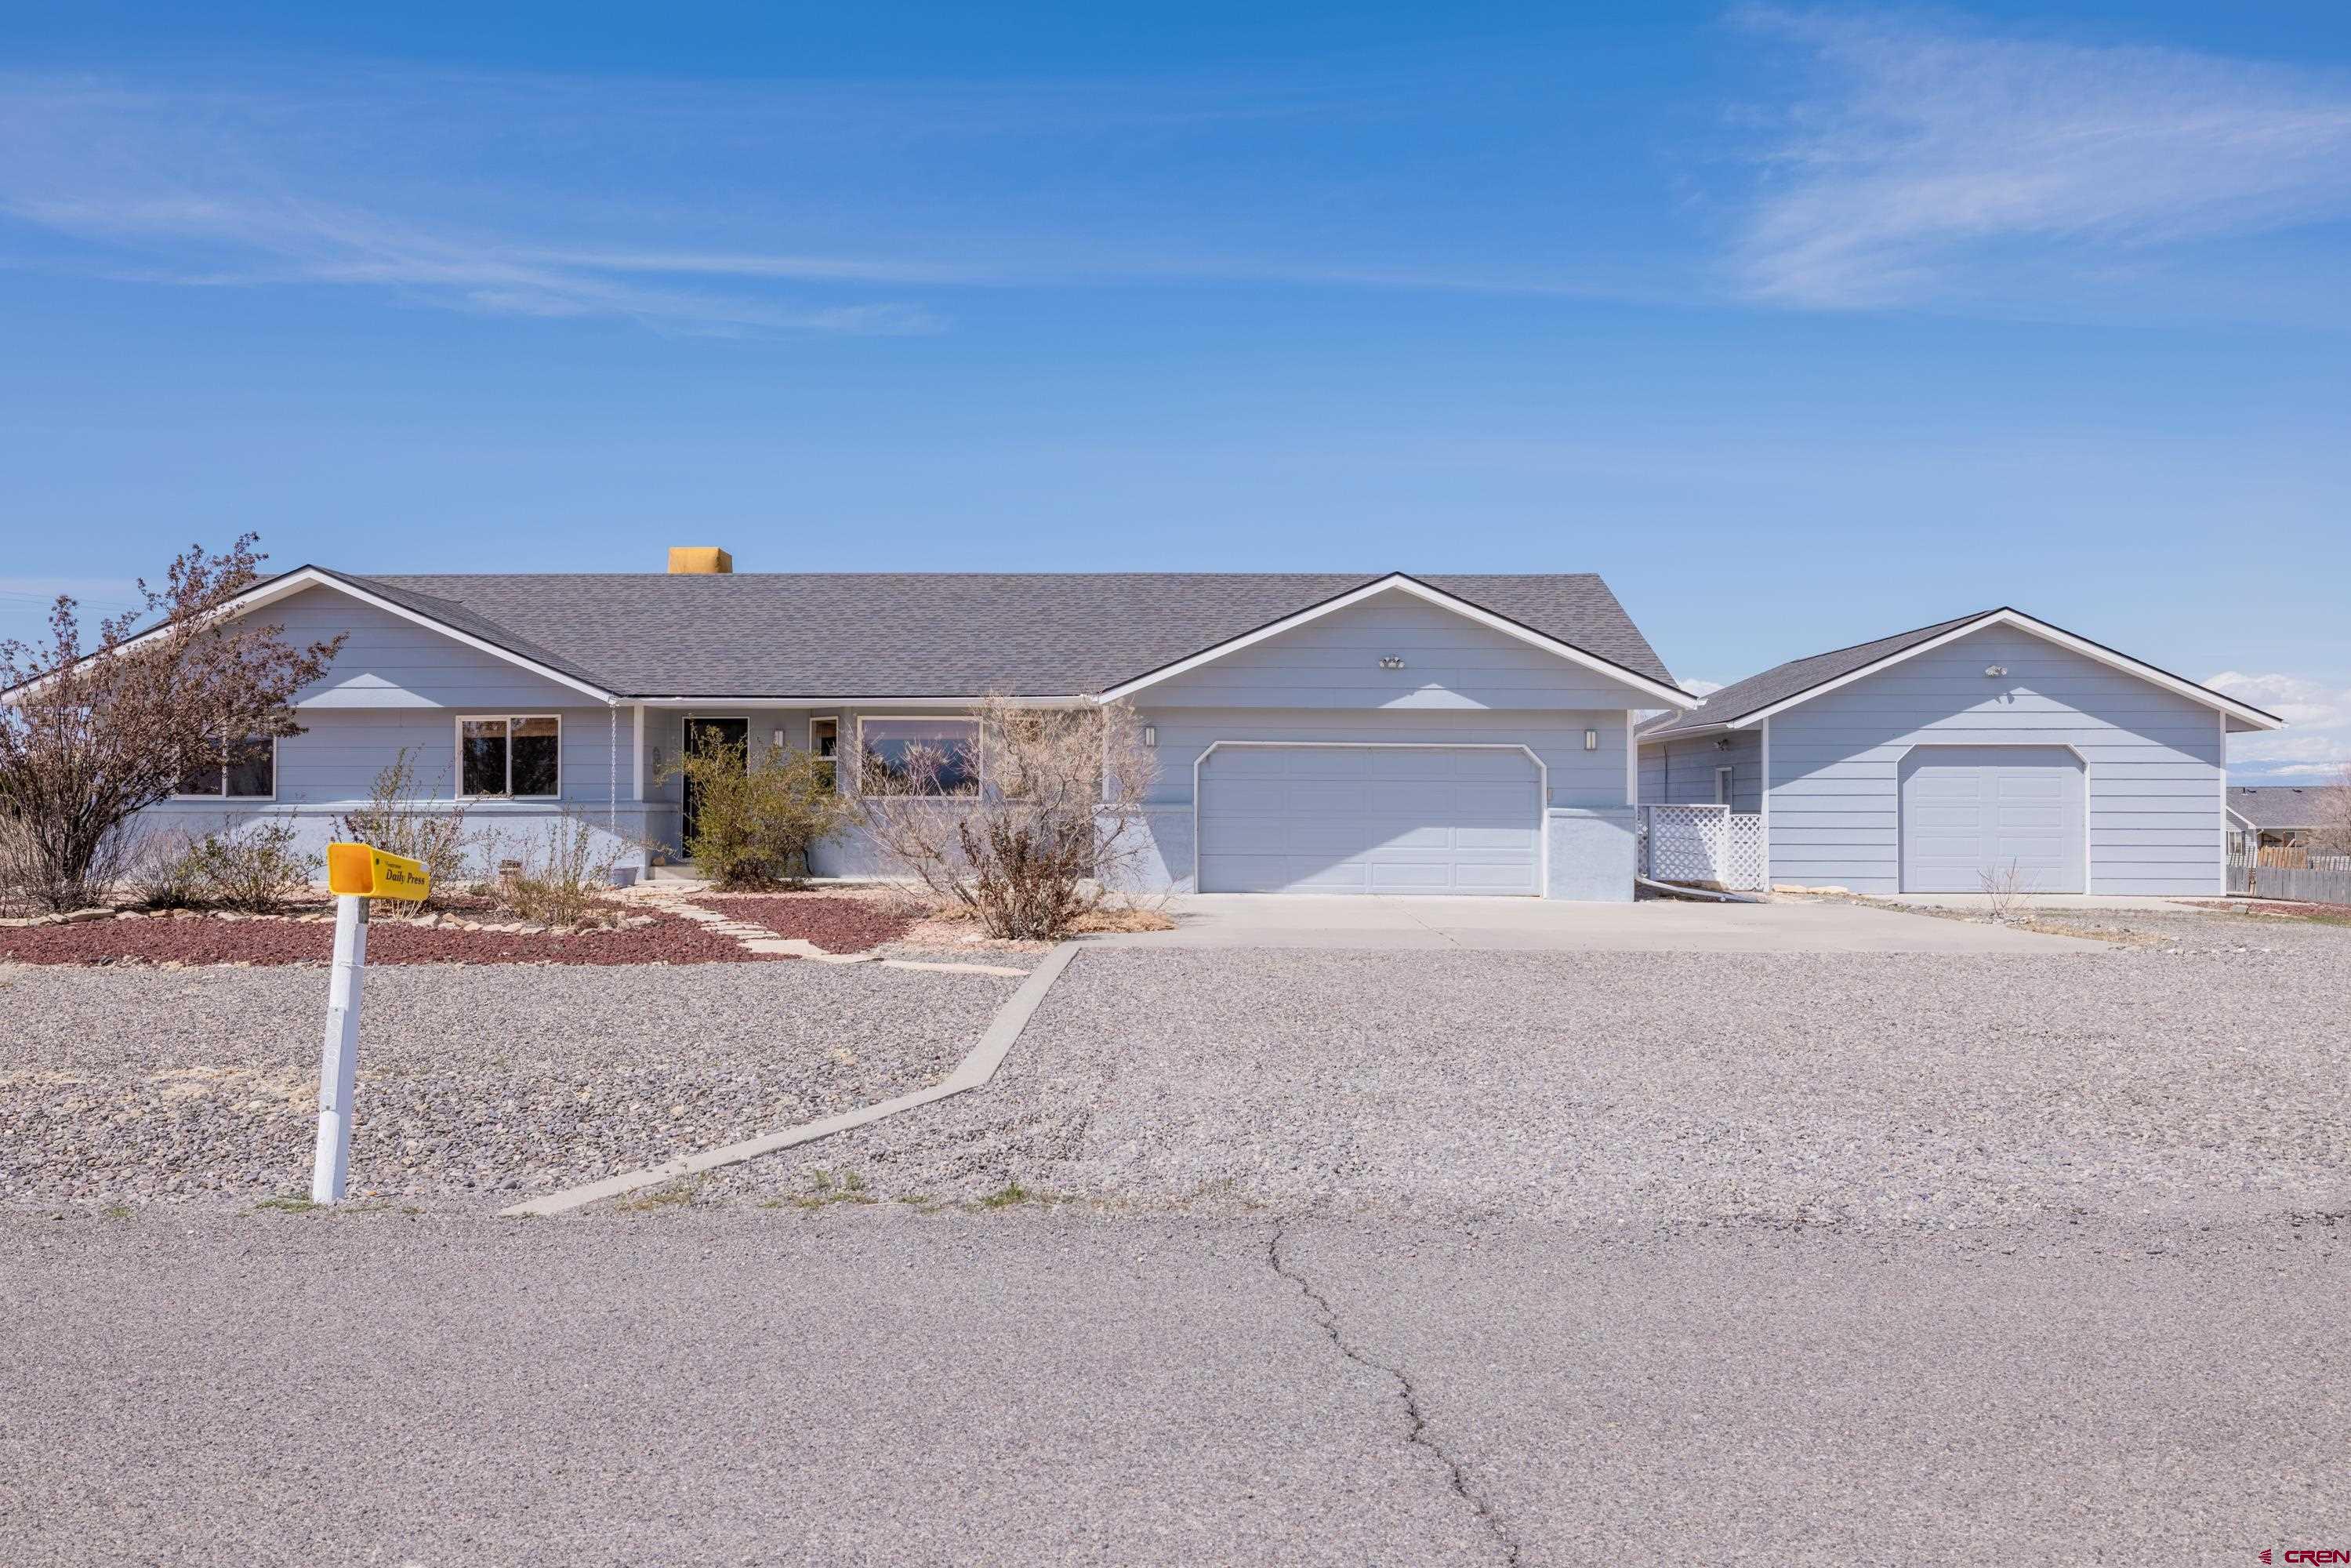 Photo of 62815 Jeremy Rd in Montrose, CO